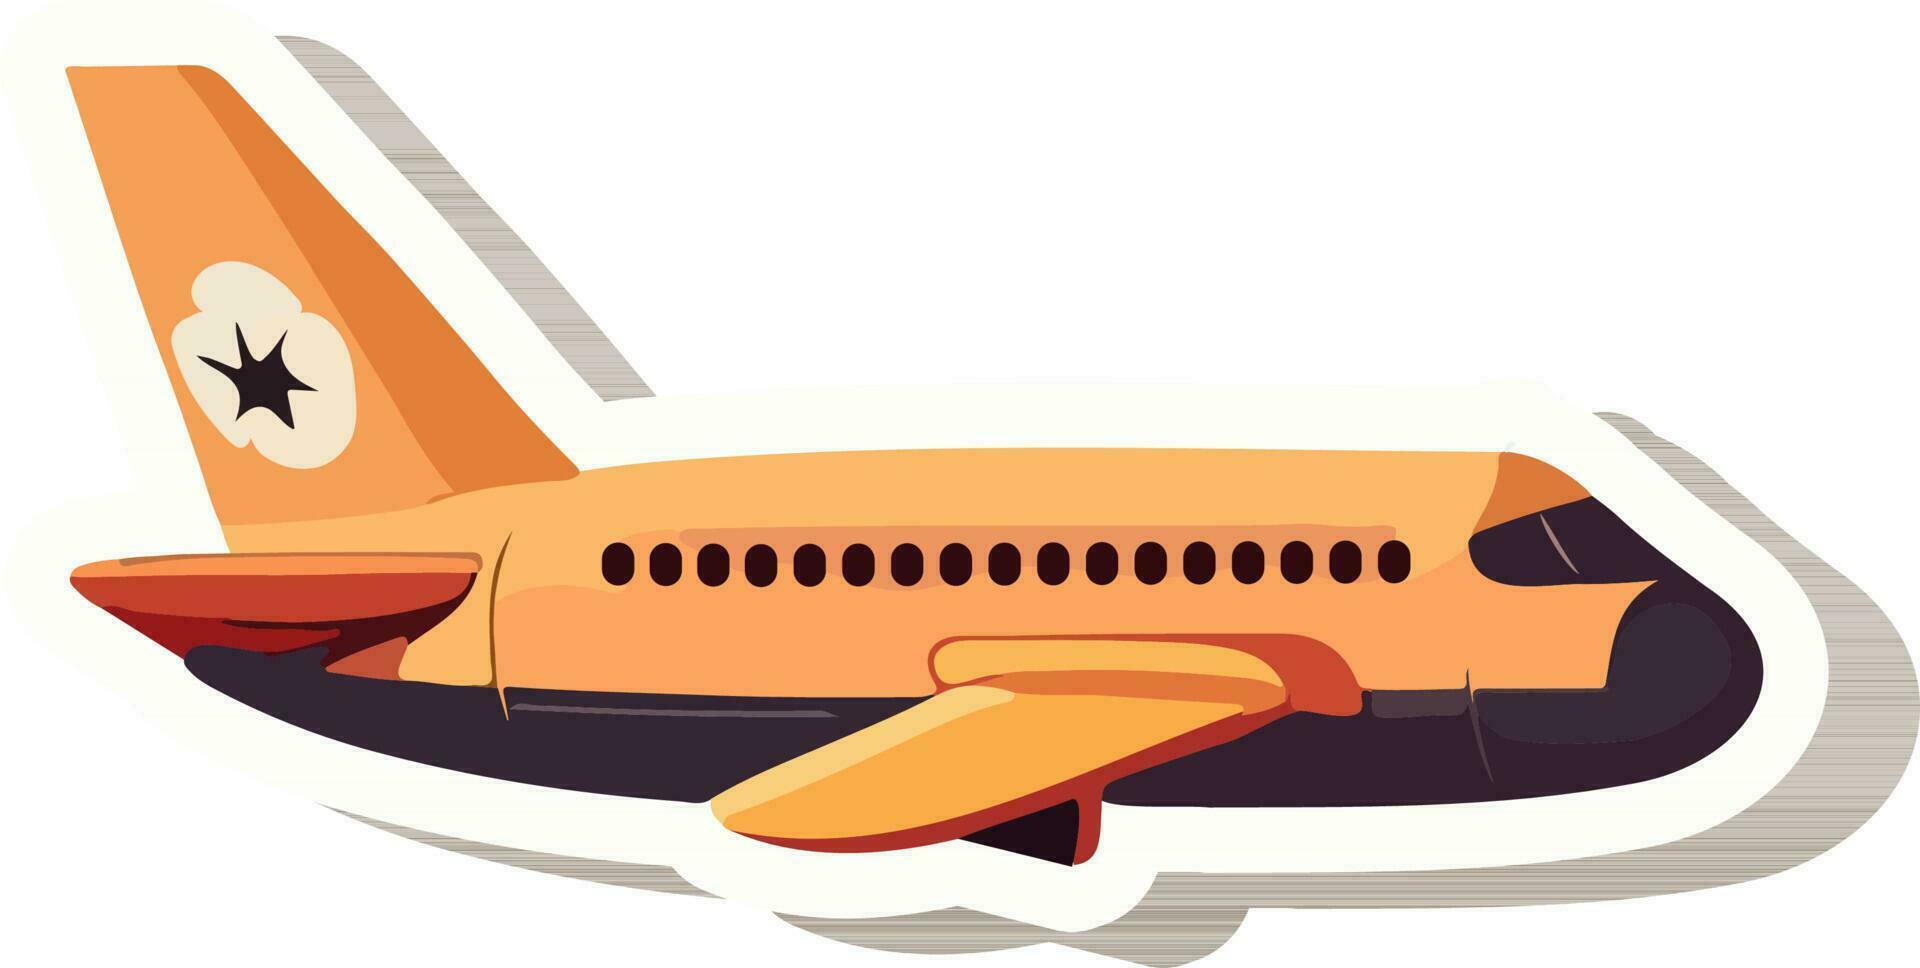 Orange And Purple Airplane Icon In Sticker Style. vector